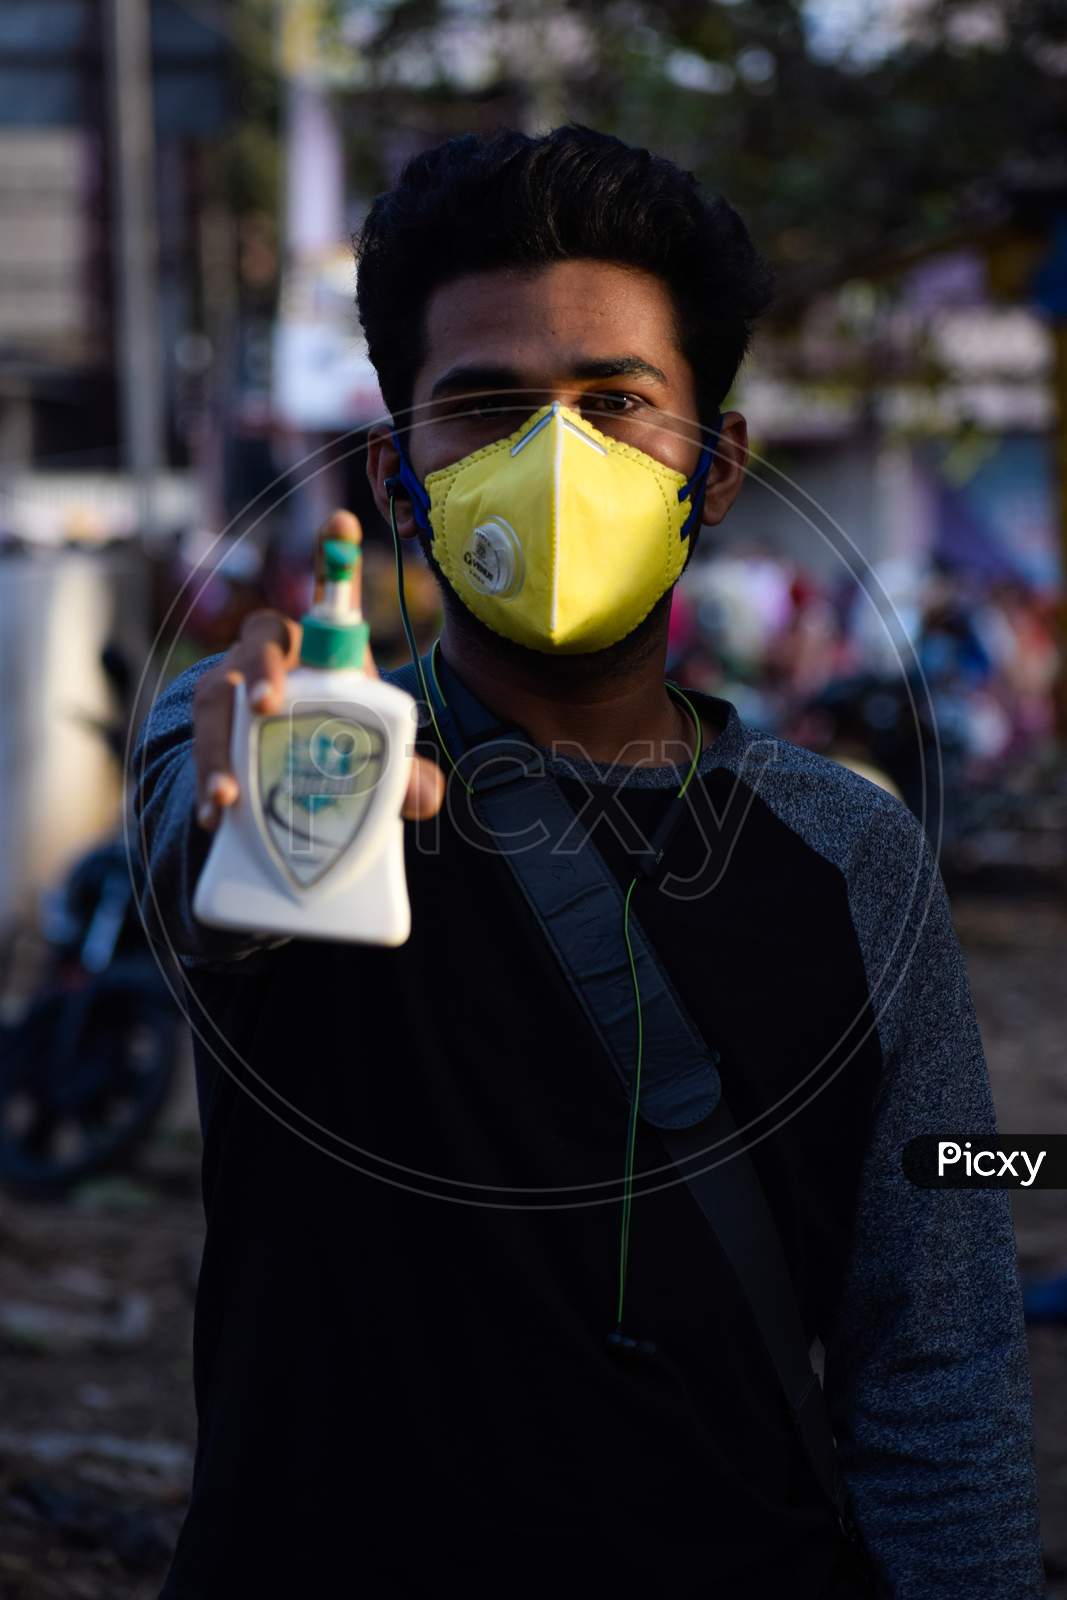 Bharuch, Gujarat/India - March 20, 2020: A men wearing CORONA VIRUS MEDICAL MASK for the prevention of COVID-19 CORONA VIRUS while showing sanitizer in his hand. Selective focus.